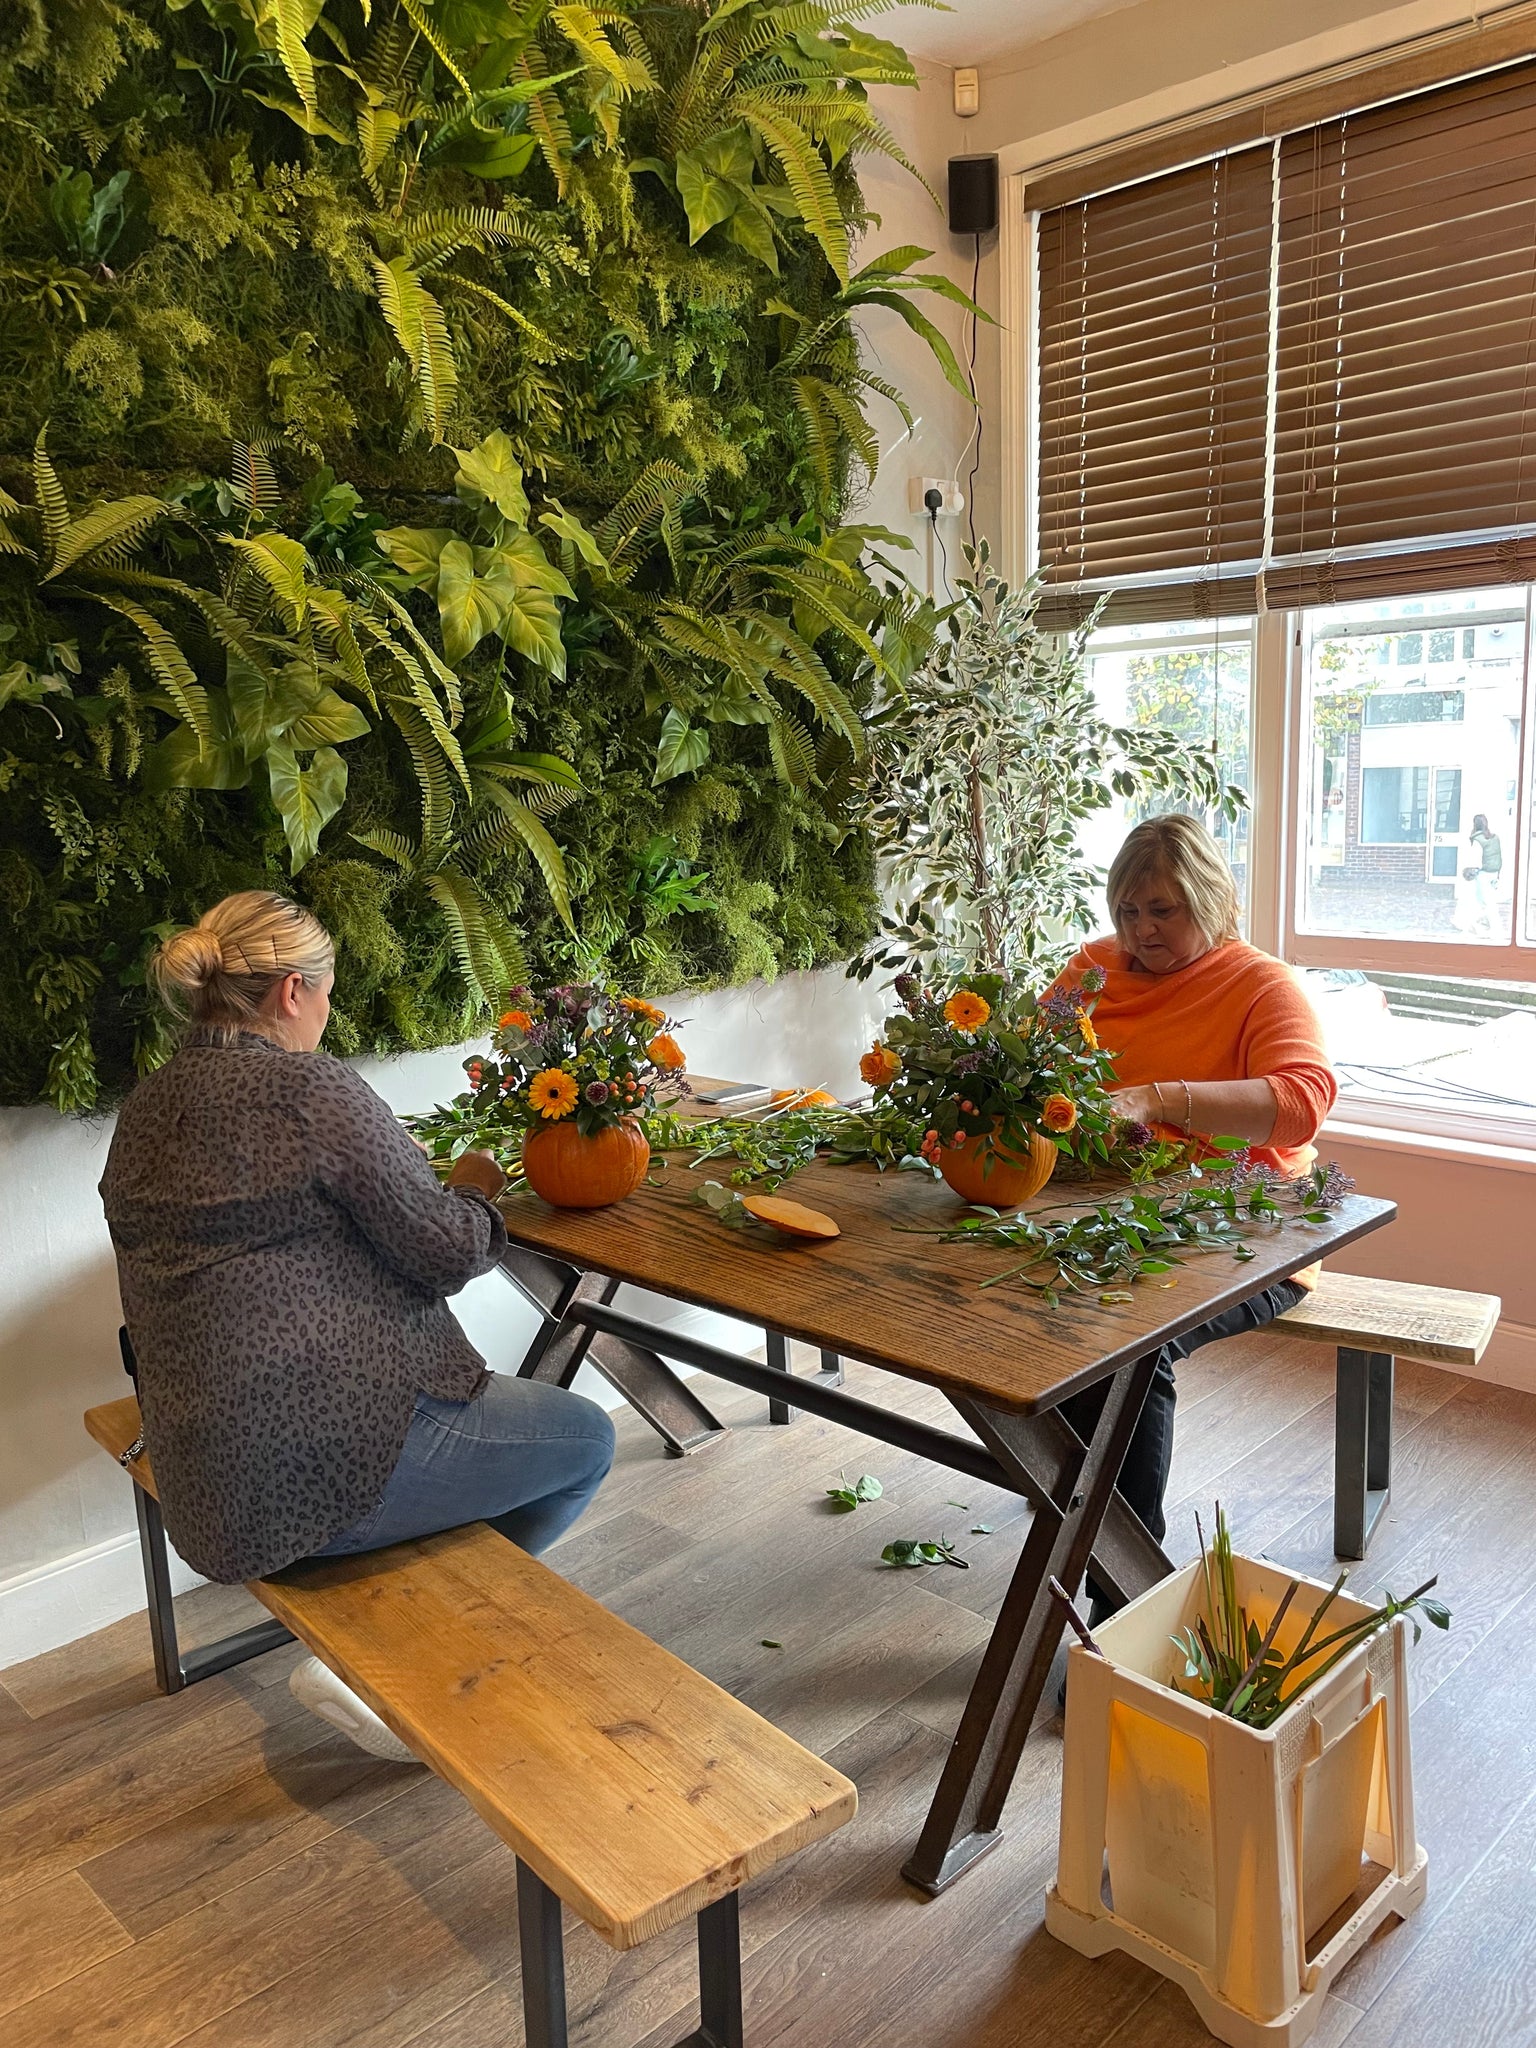 Floral Pumpkin Workshop – Saturday 28th October, Starting @ 3pm (£65 per person): 2 hours